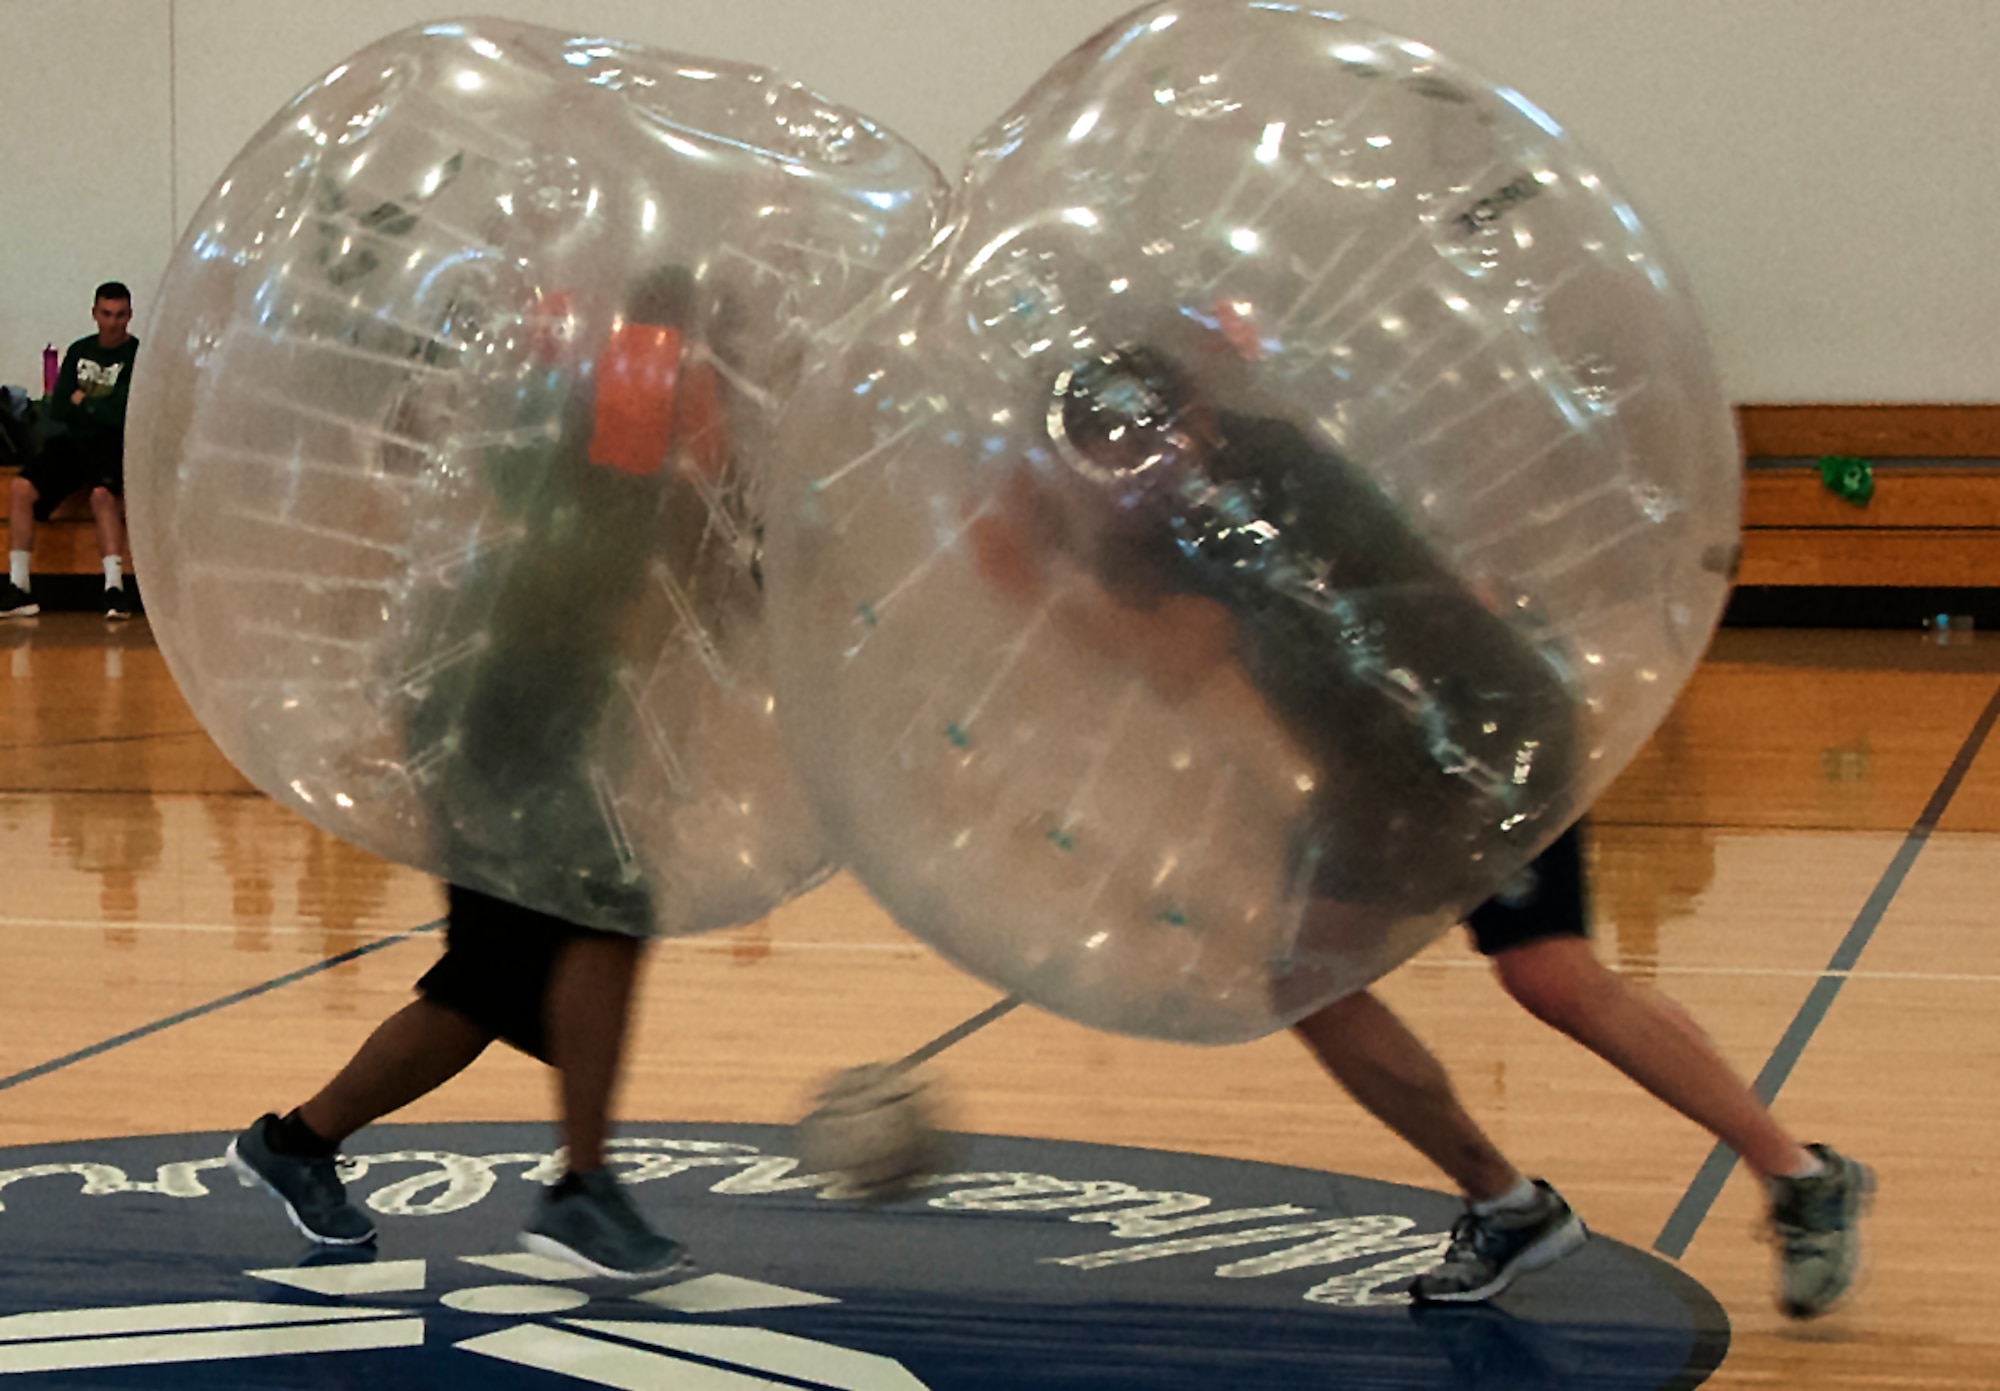 Two Airmen ram into one another during a bubble soccer game April 22, 2016, during a tournament inside the Freedom Hall Fitness Center on F.E. Warren Air Force Base, Wyo. Though scoring a goal was the overall objective, utilizing the bubbles to push opponents out of the way helped score. (U.S. Air Force photo by Senior Airman Brandon Valle)